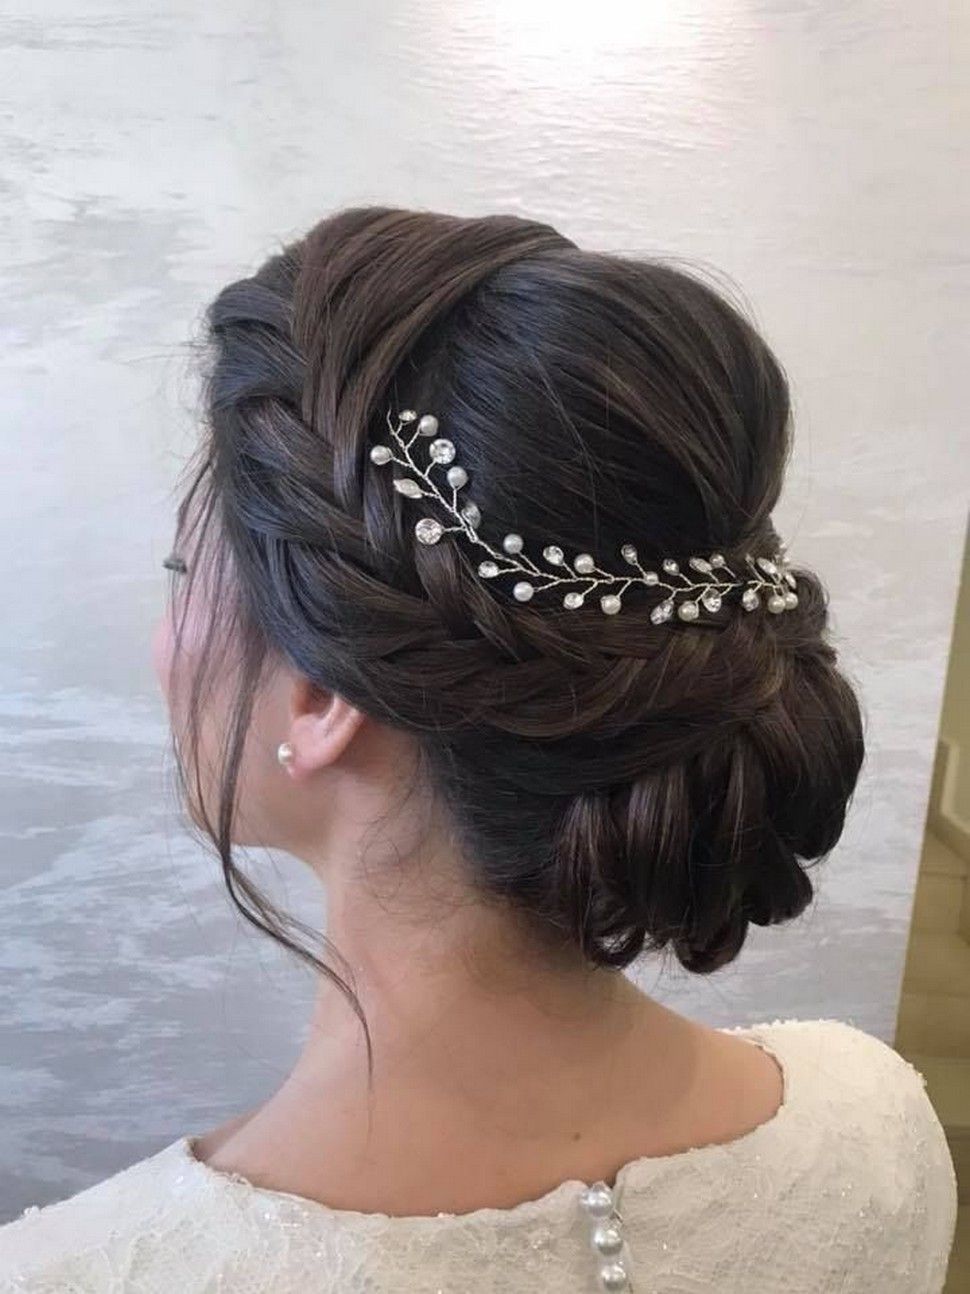 Hair up with beautiful hair brooch